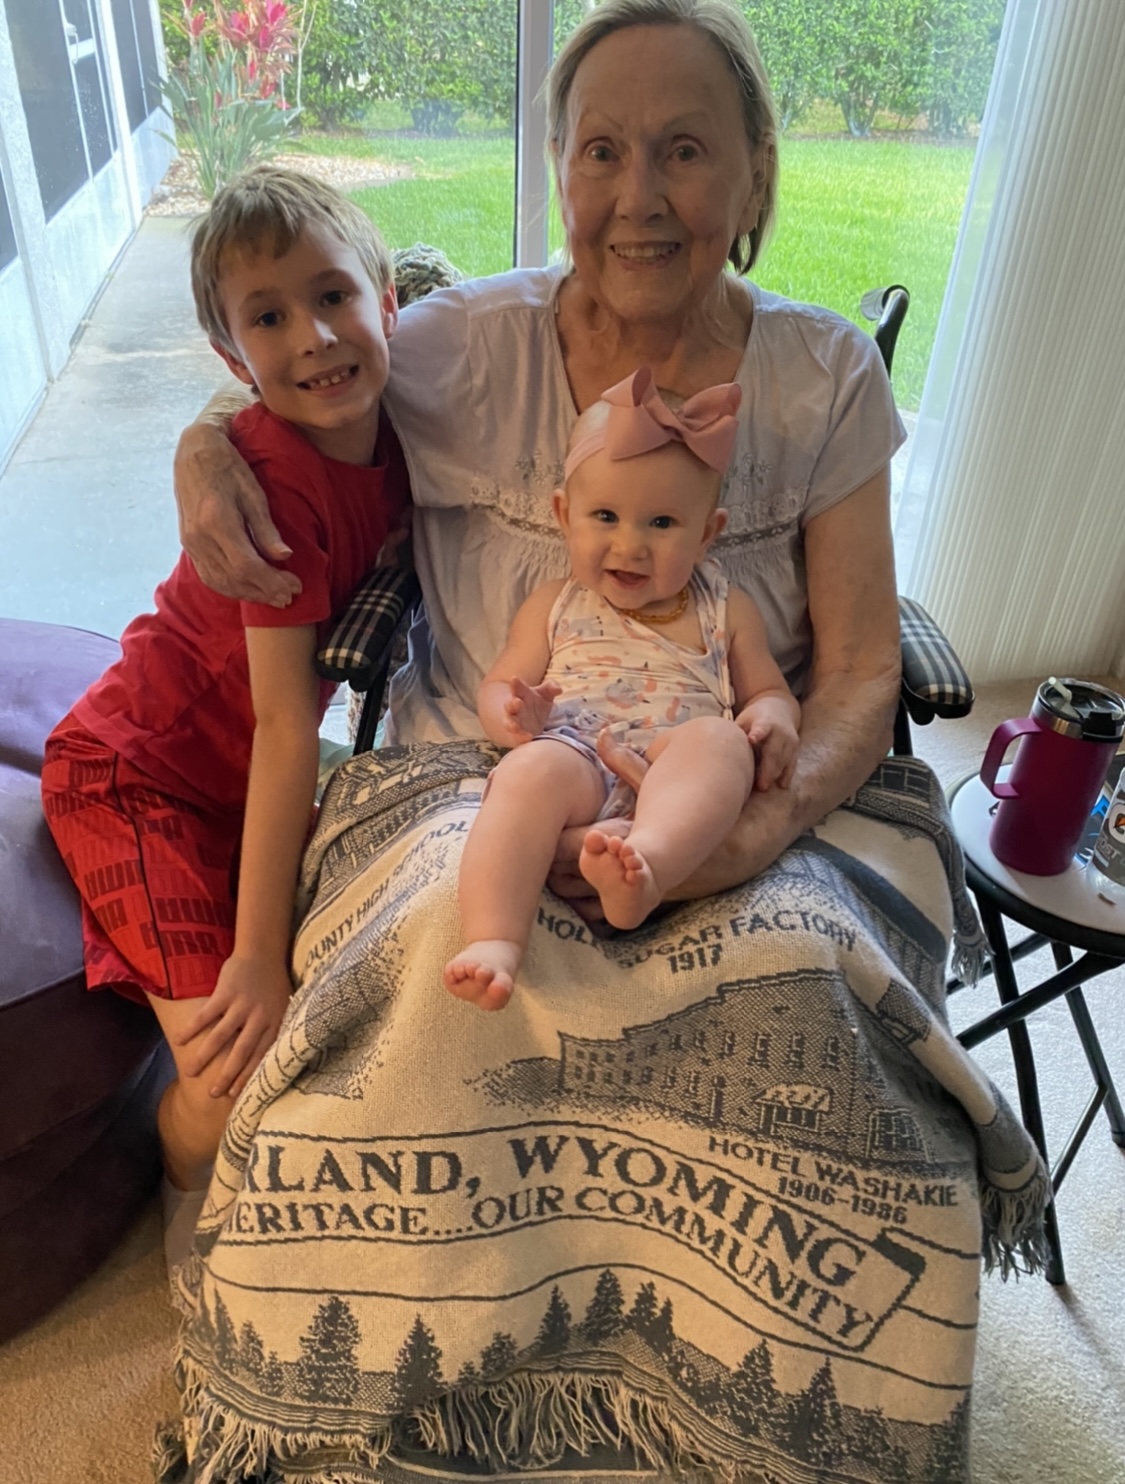 Gran, Evie and Aiden